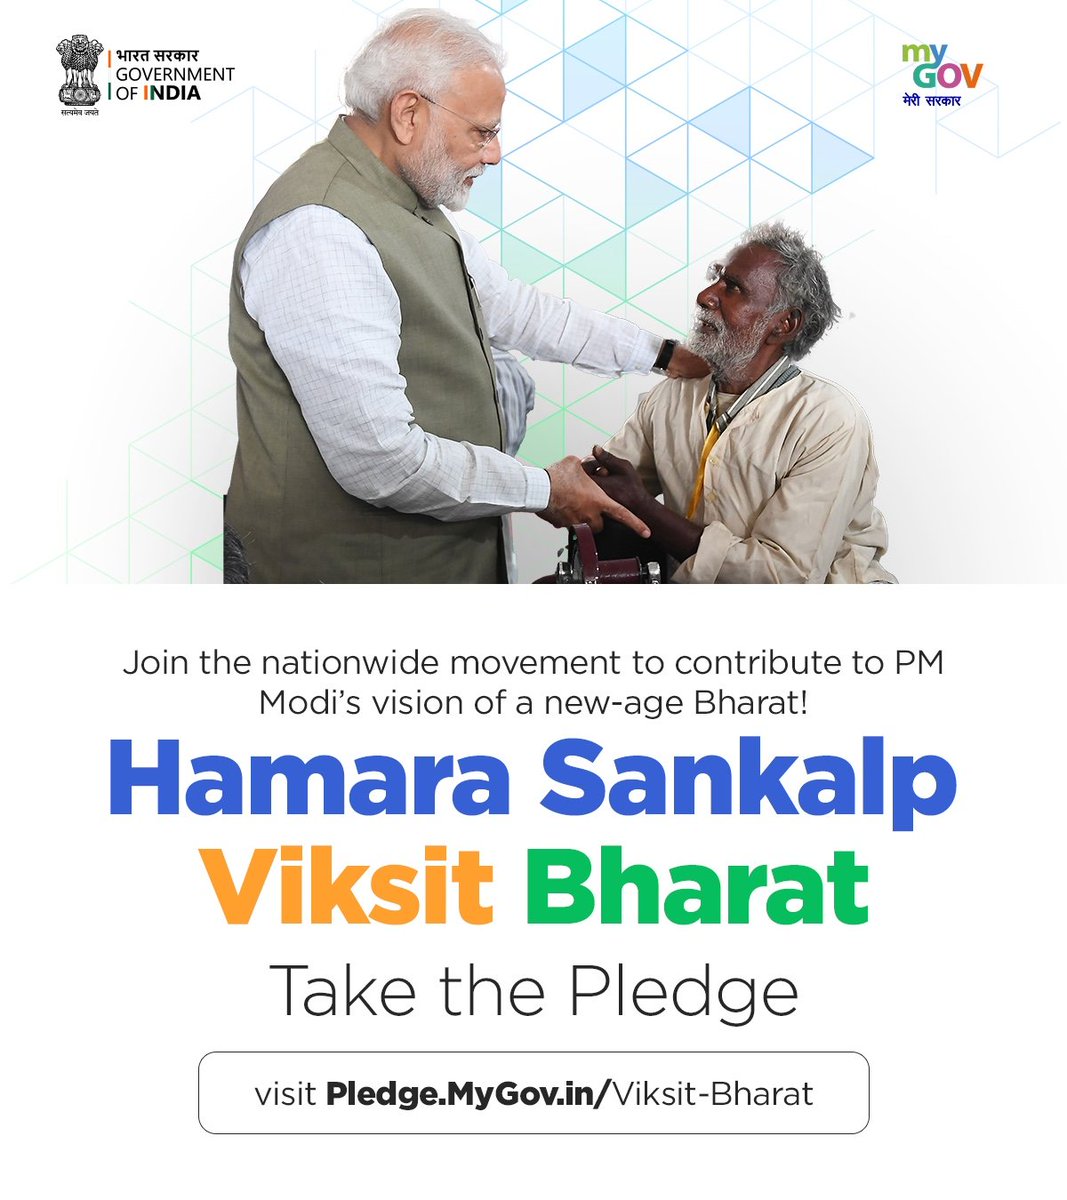 Embarking on the #ViksitBharatSankalpYatra with PM Modi Ji – a journey towards a developed India! 🚀 Join hands for progress, innovation, and inclusive growth. Let's be the change we want to see! 🇮🇳 #HumuraSankalpViksitBharat #ViksitBharatKaSankalp